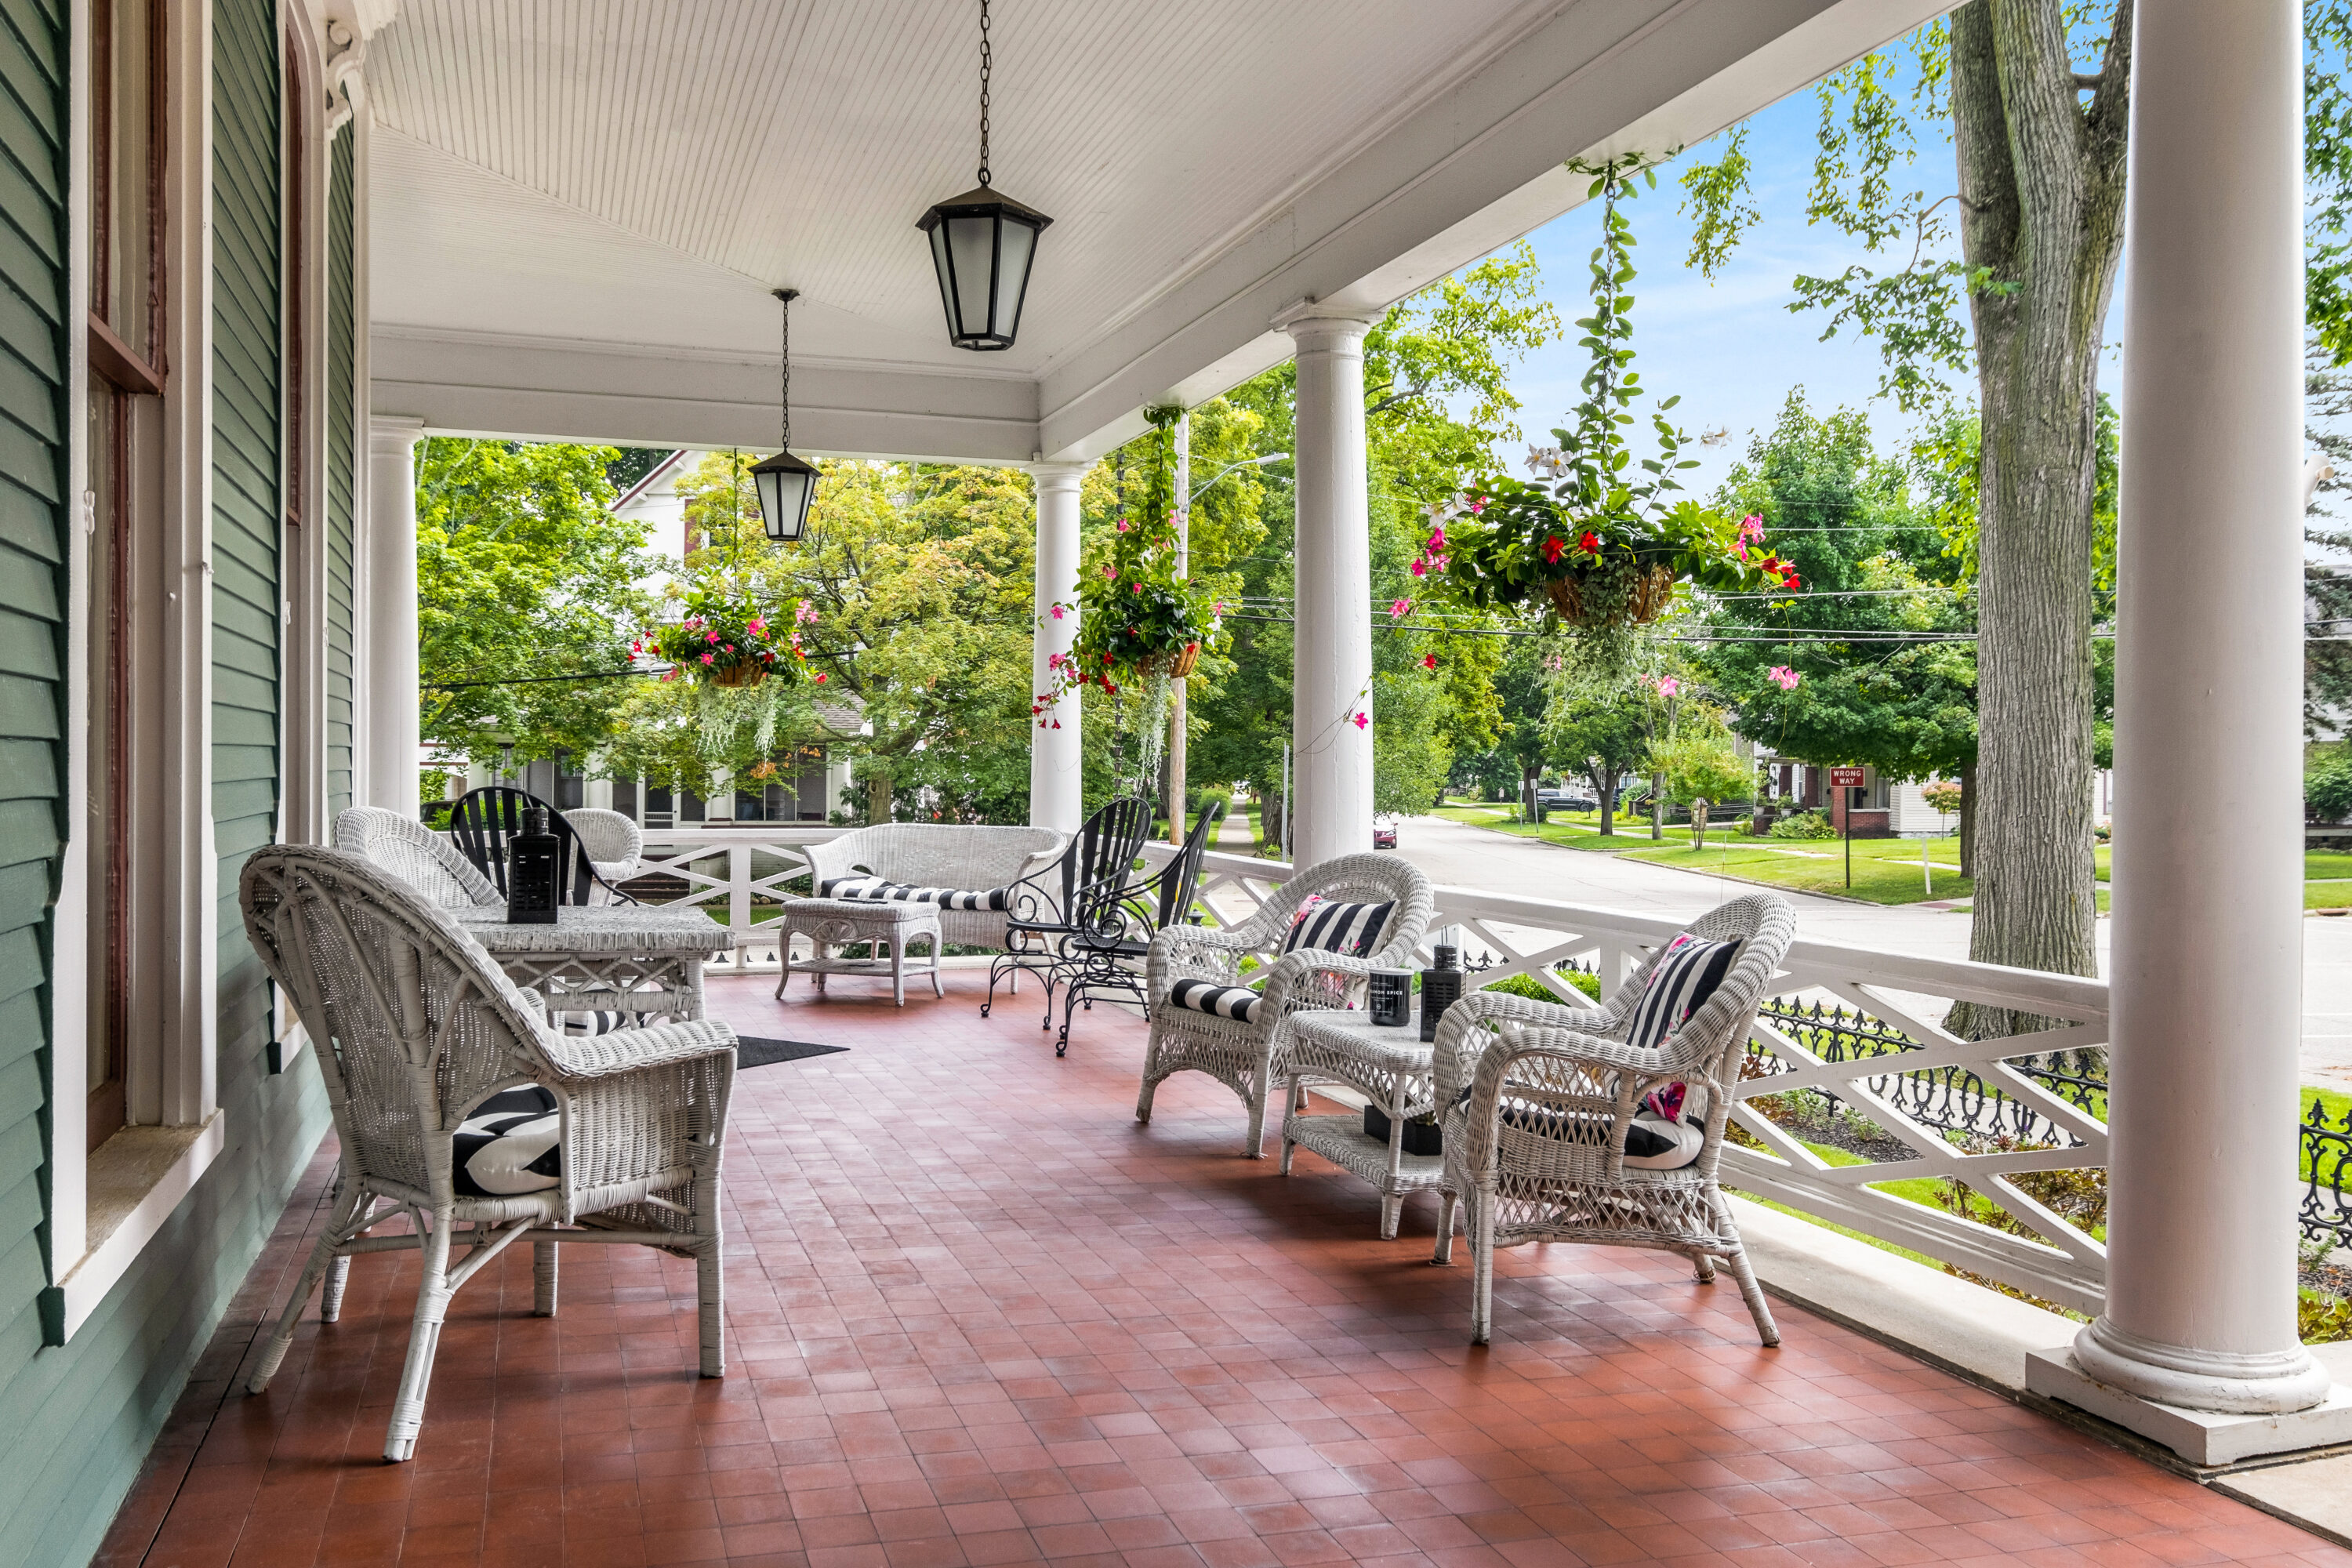 Porch perfect for group events in Southern Michigan